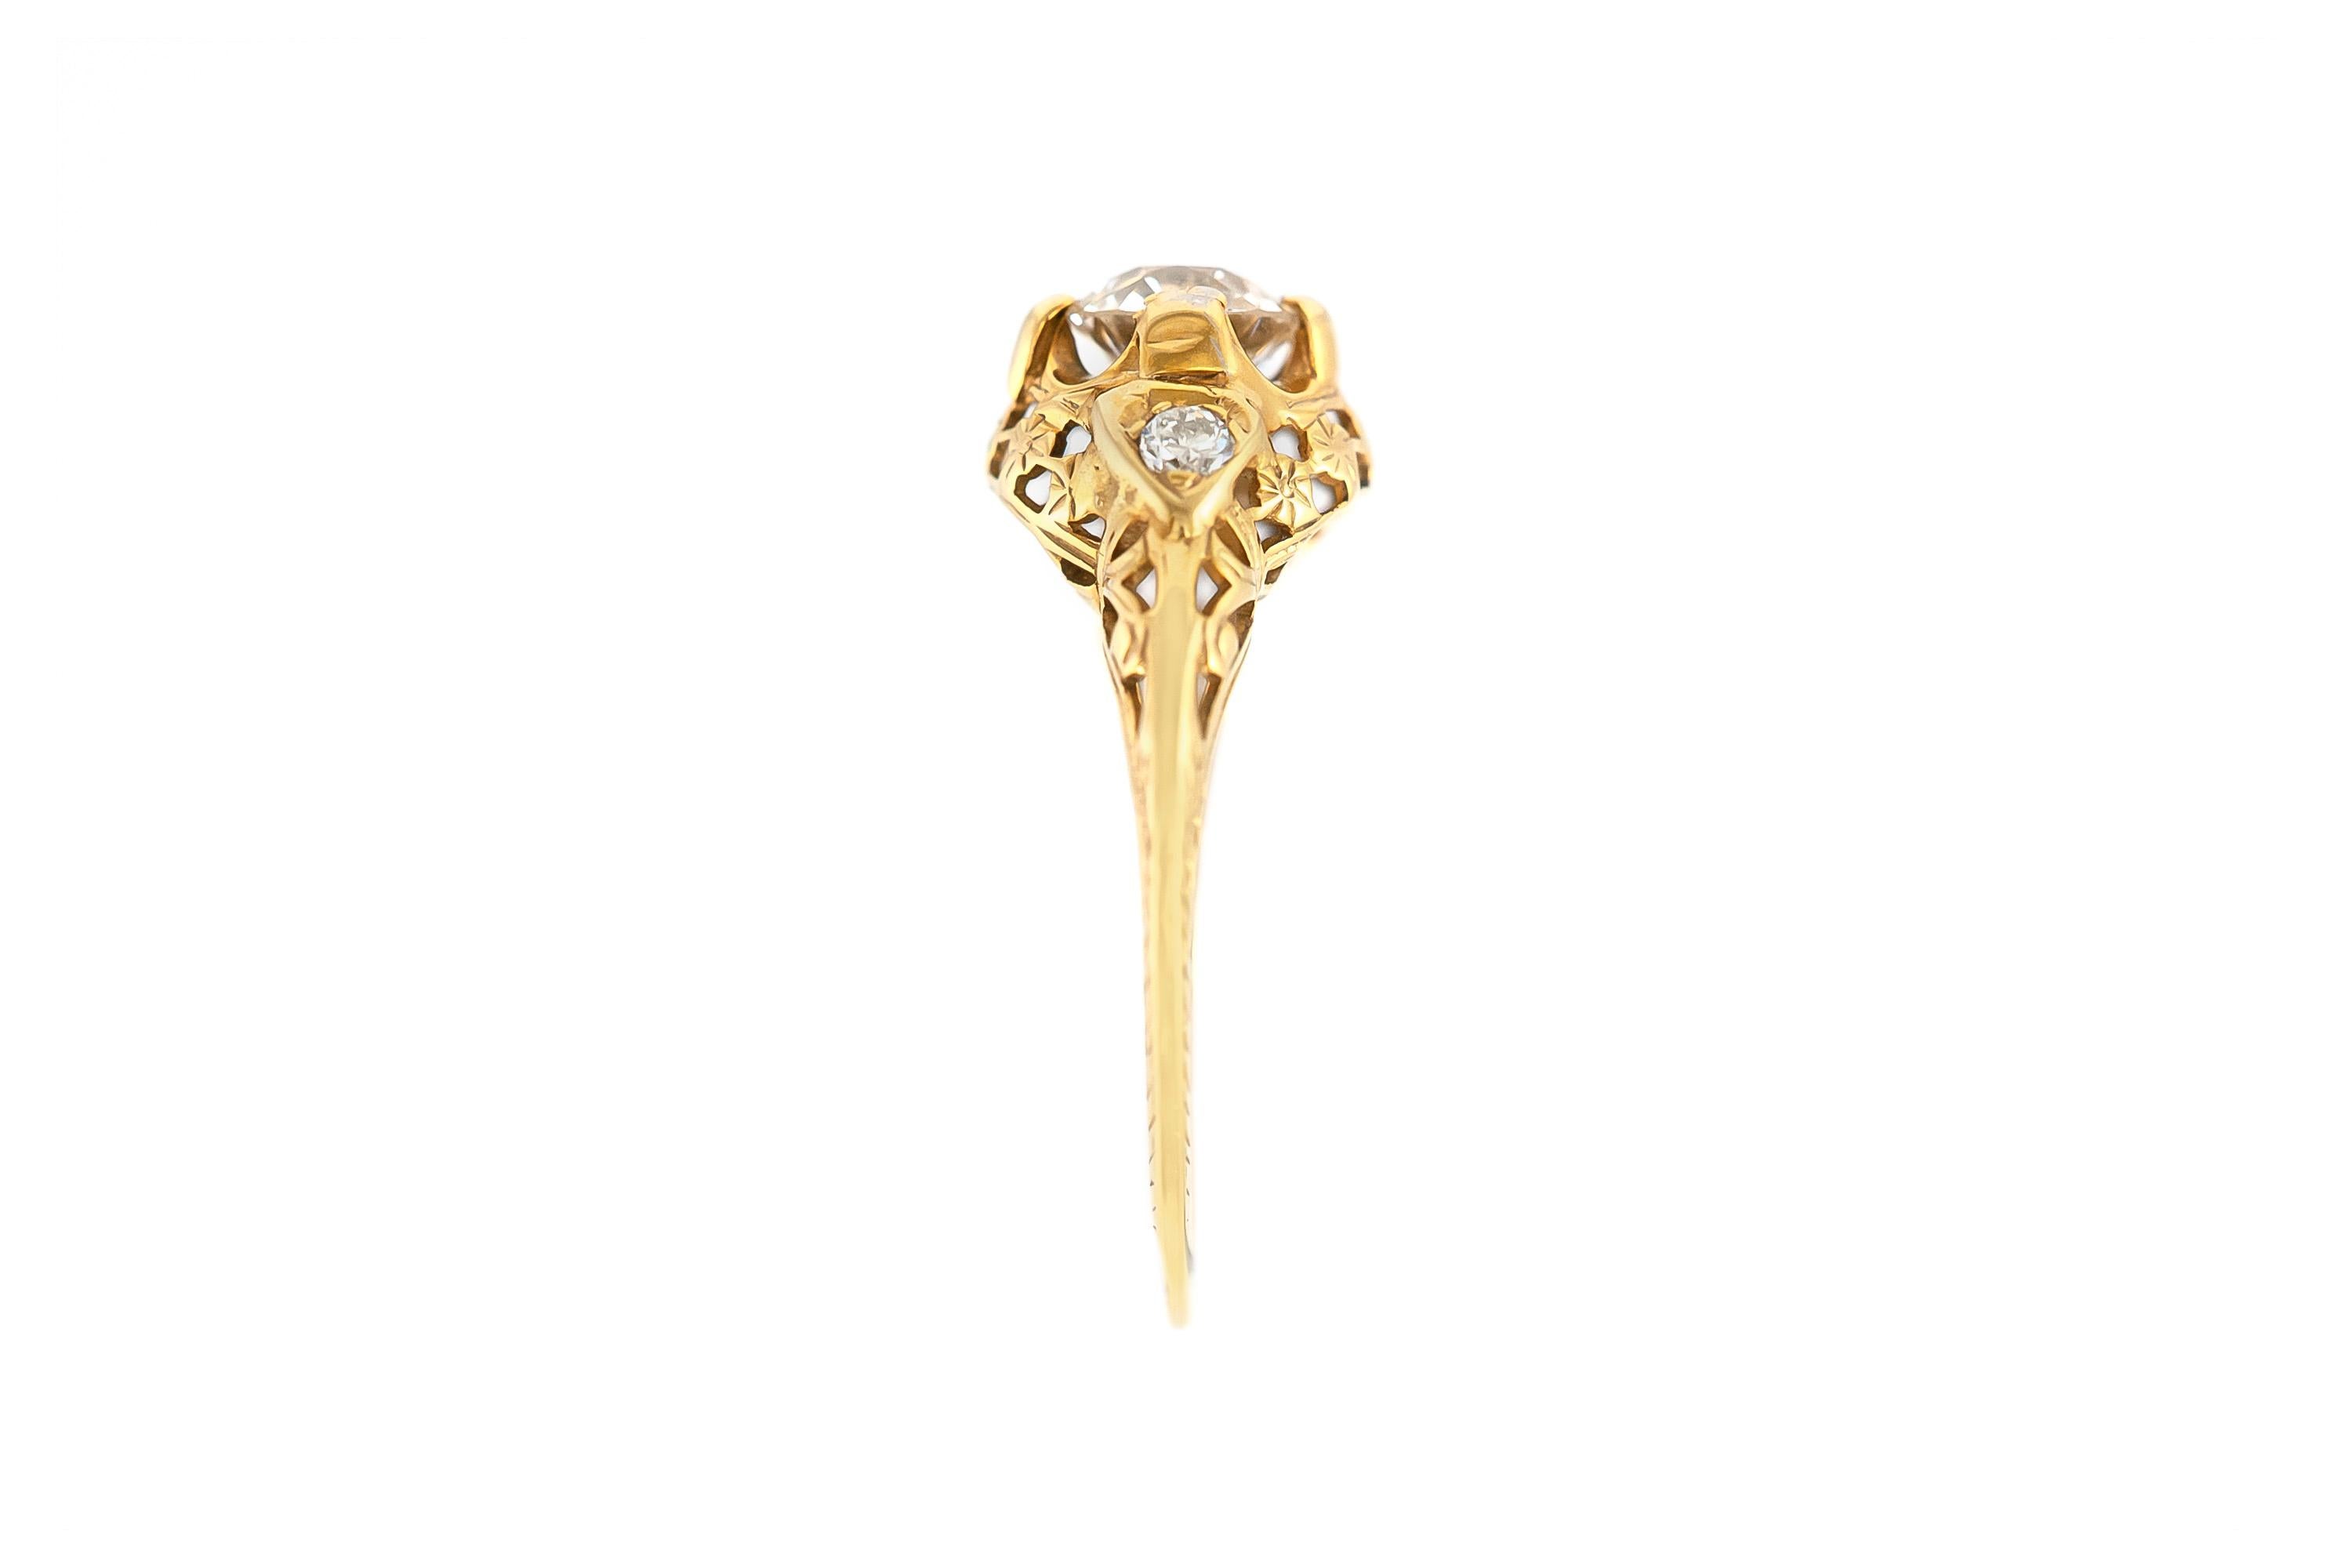 The beautiful ring is finely crafted in 14k yellow gold with center diamond weighing approximately total of 0.80 carat and 0.10 carat of two side round diamond .
Circa 1930.
Easy to resize